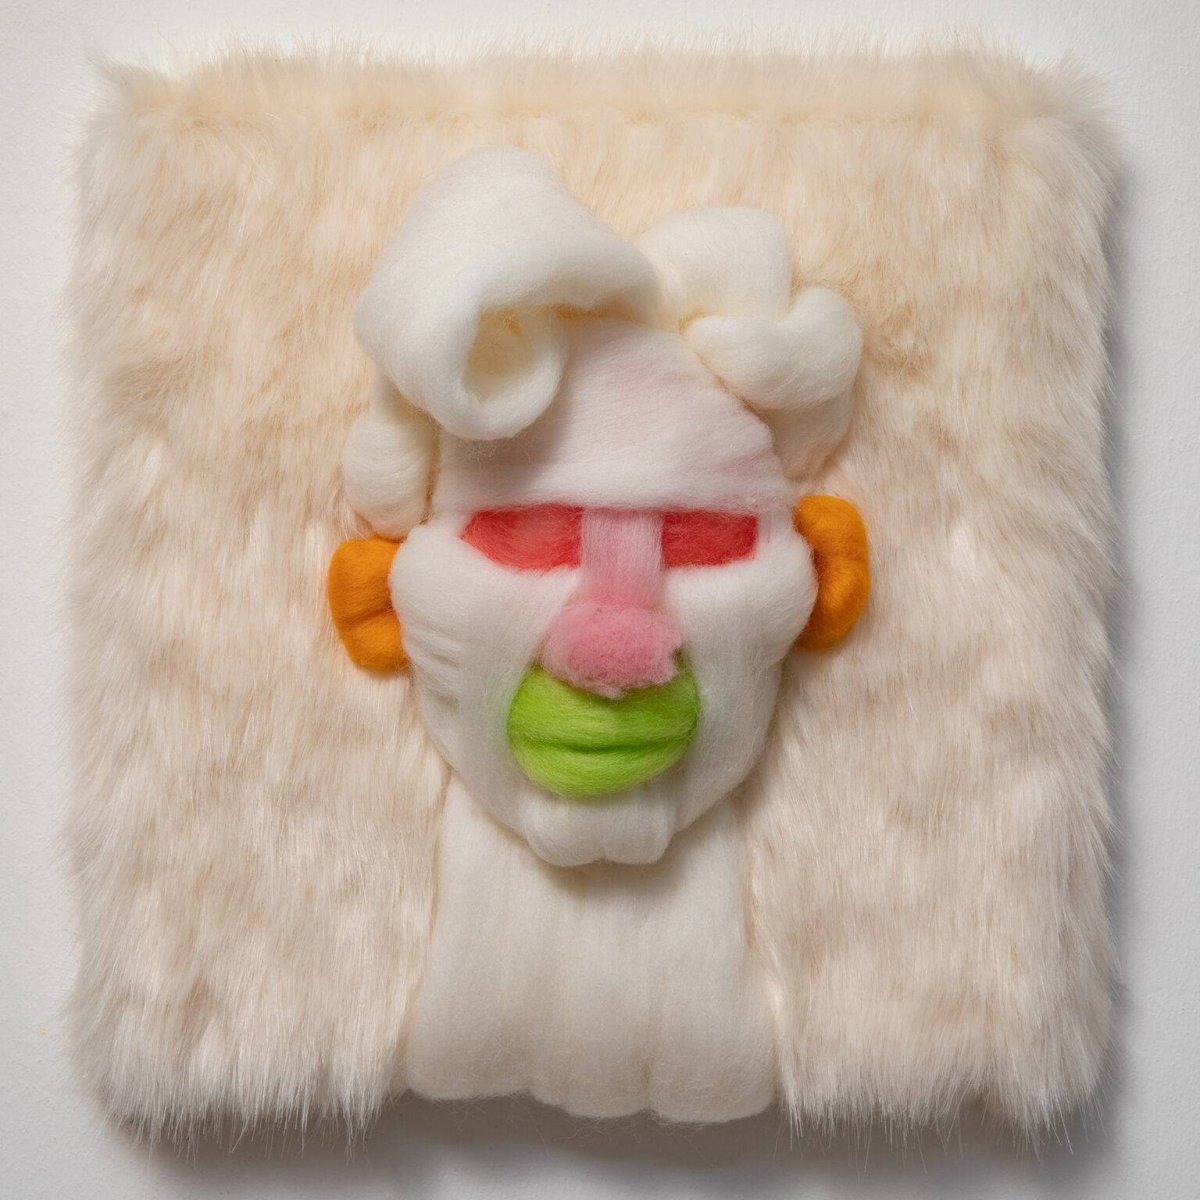 Expressive Sculptural Portraits Made Of Raw Wool By Salman Khoshroo 12